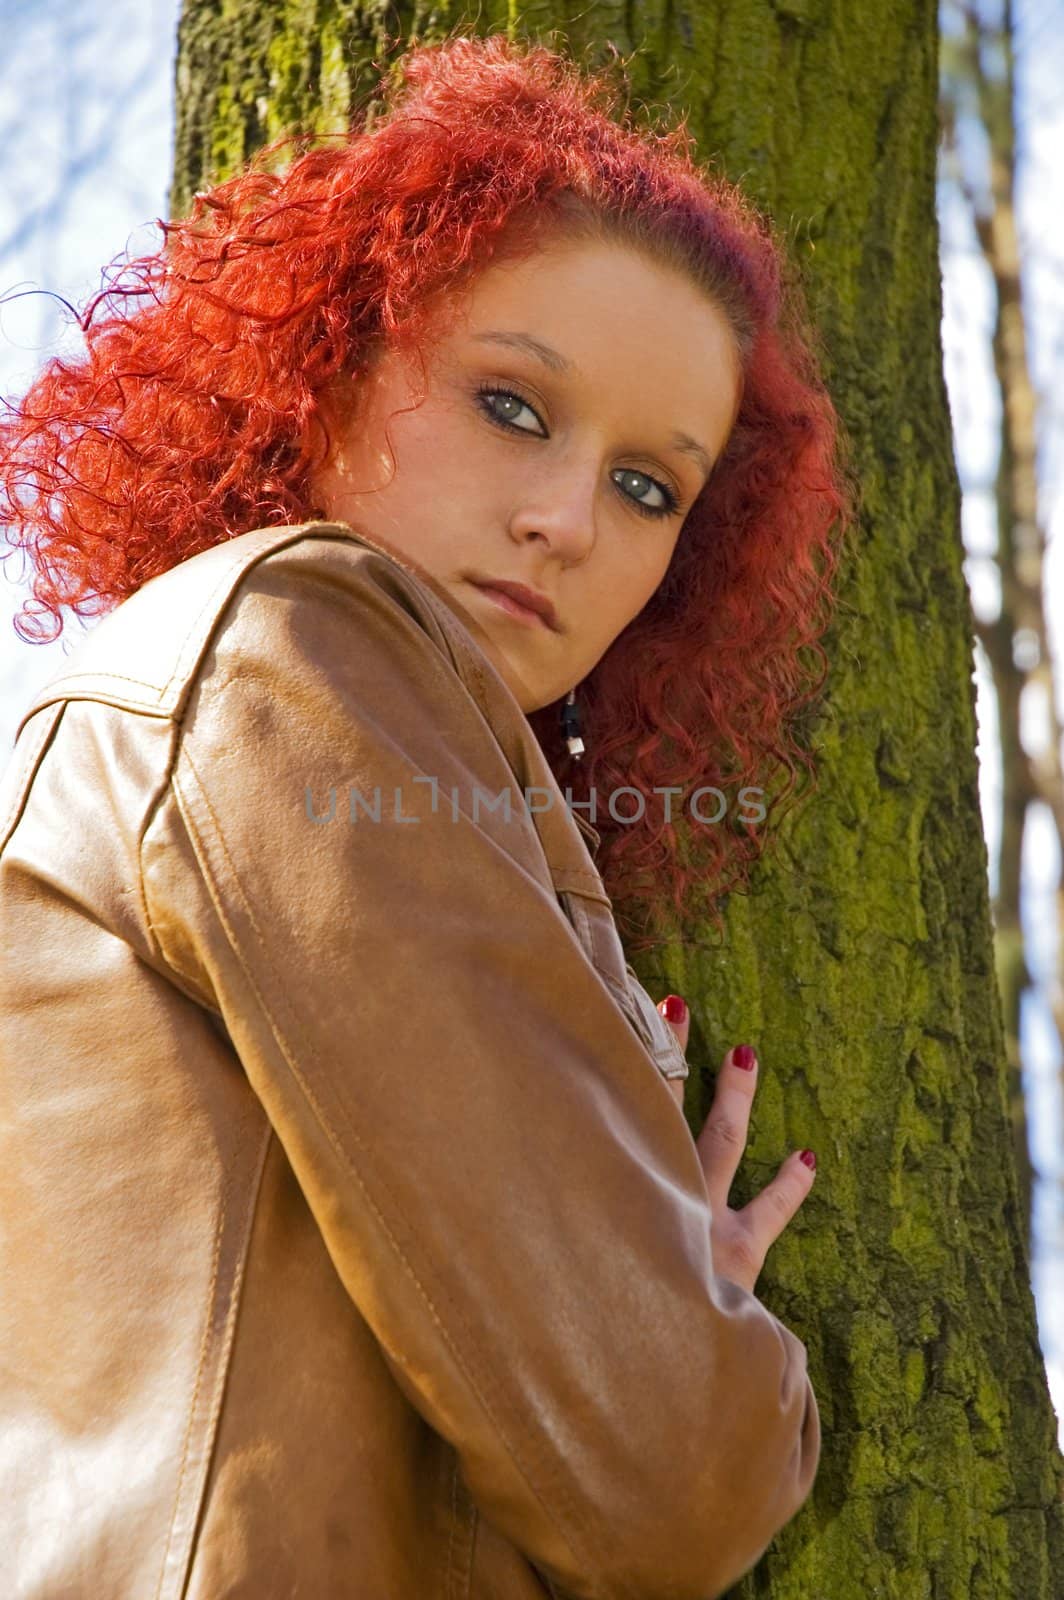 Beautiful young women in forest by Michalowski